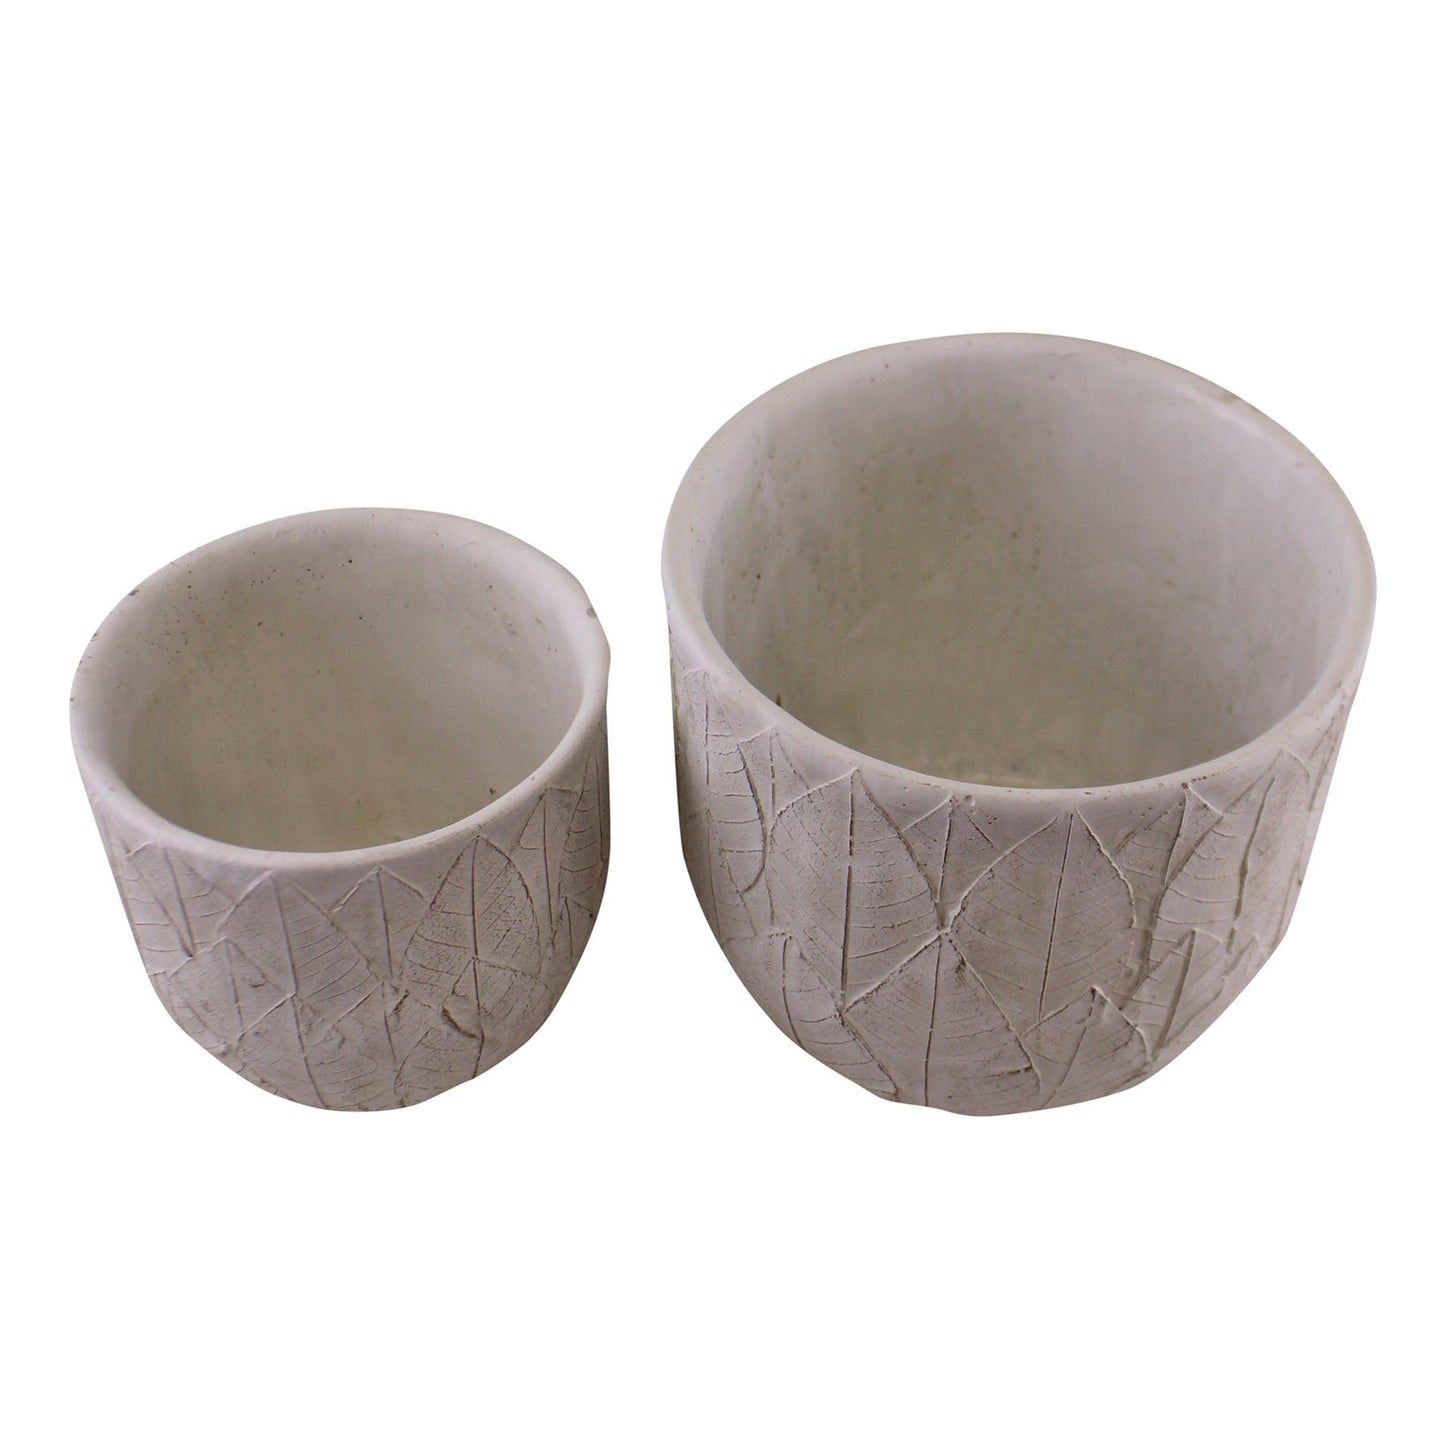 Decorative Set of 2 Cement Embossed Leaf White Planters Top View Inside